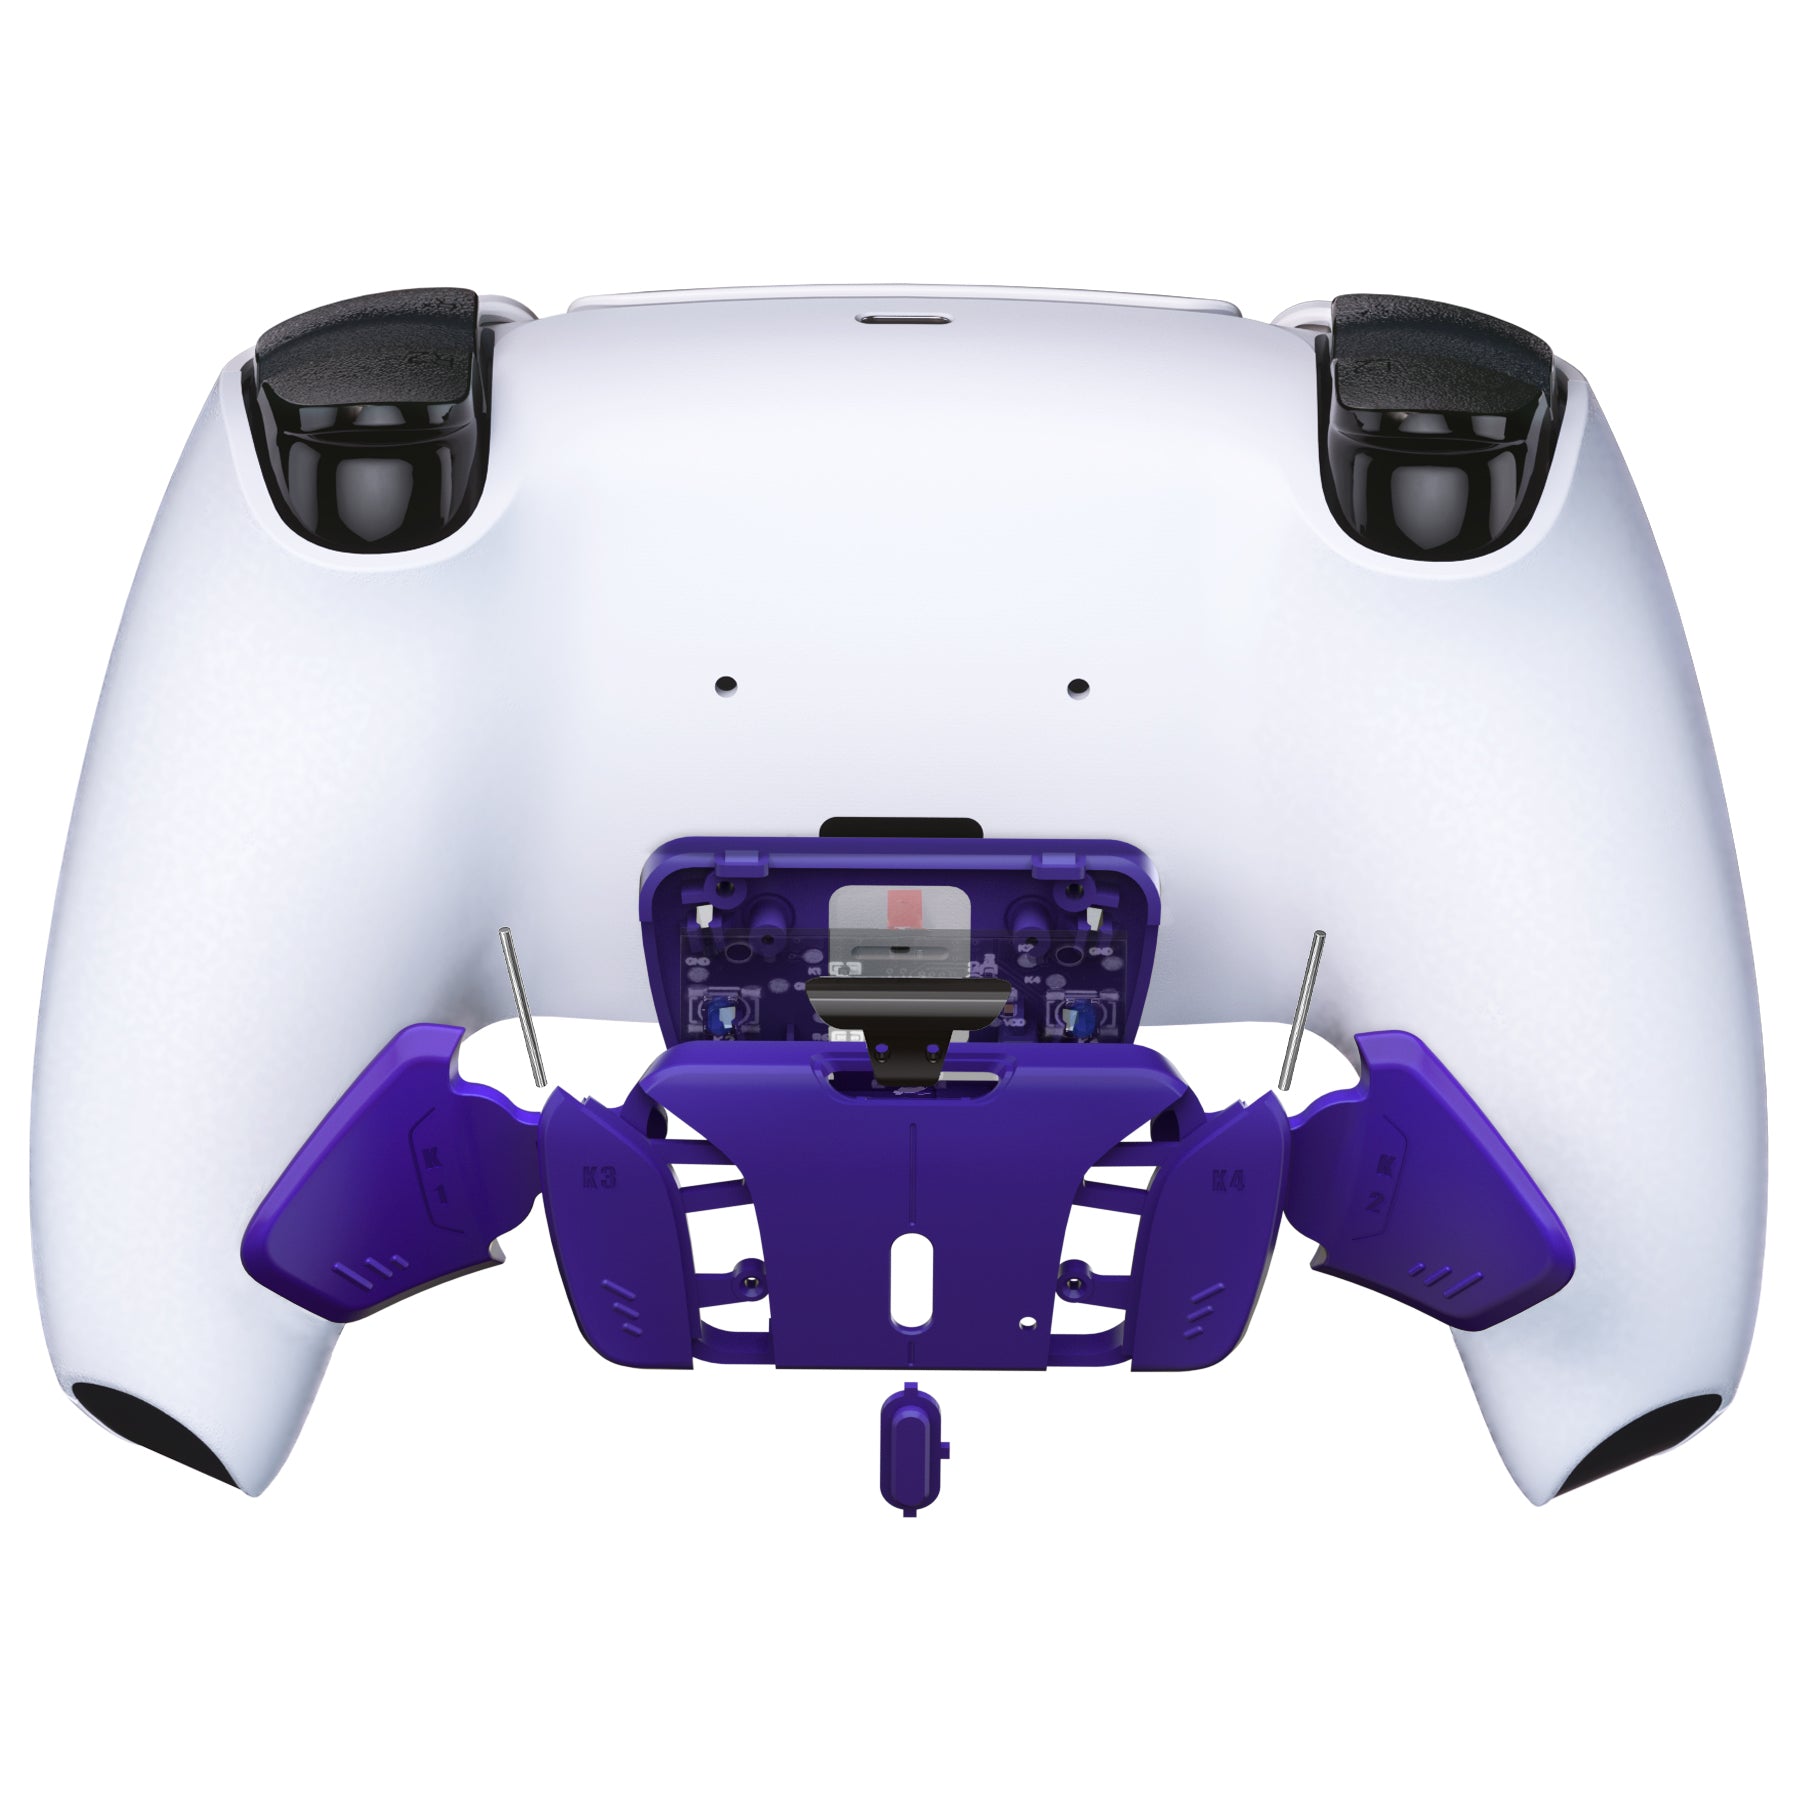 eXtremeRate Retail Galactic Purple Replacement Redesigned K1 K2 K3 K4 Back Buttons Housing Shell for PS5 Controller eXtremeRate RISE4 Remap Kit - Controller & RISE4 Remap Board NOT Included - VPFM5006